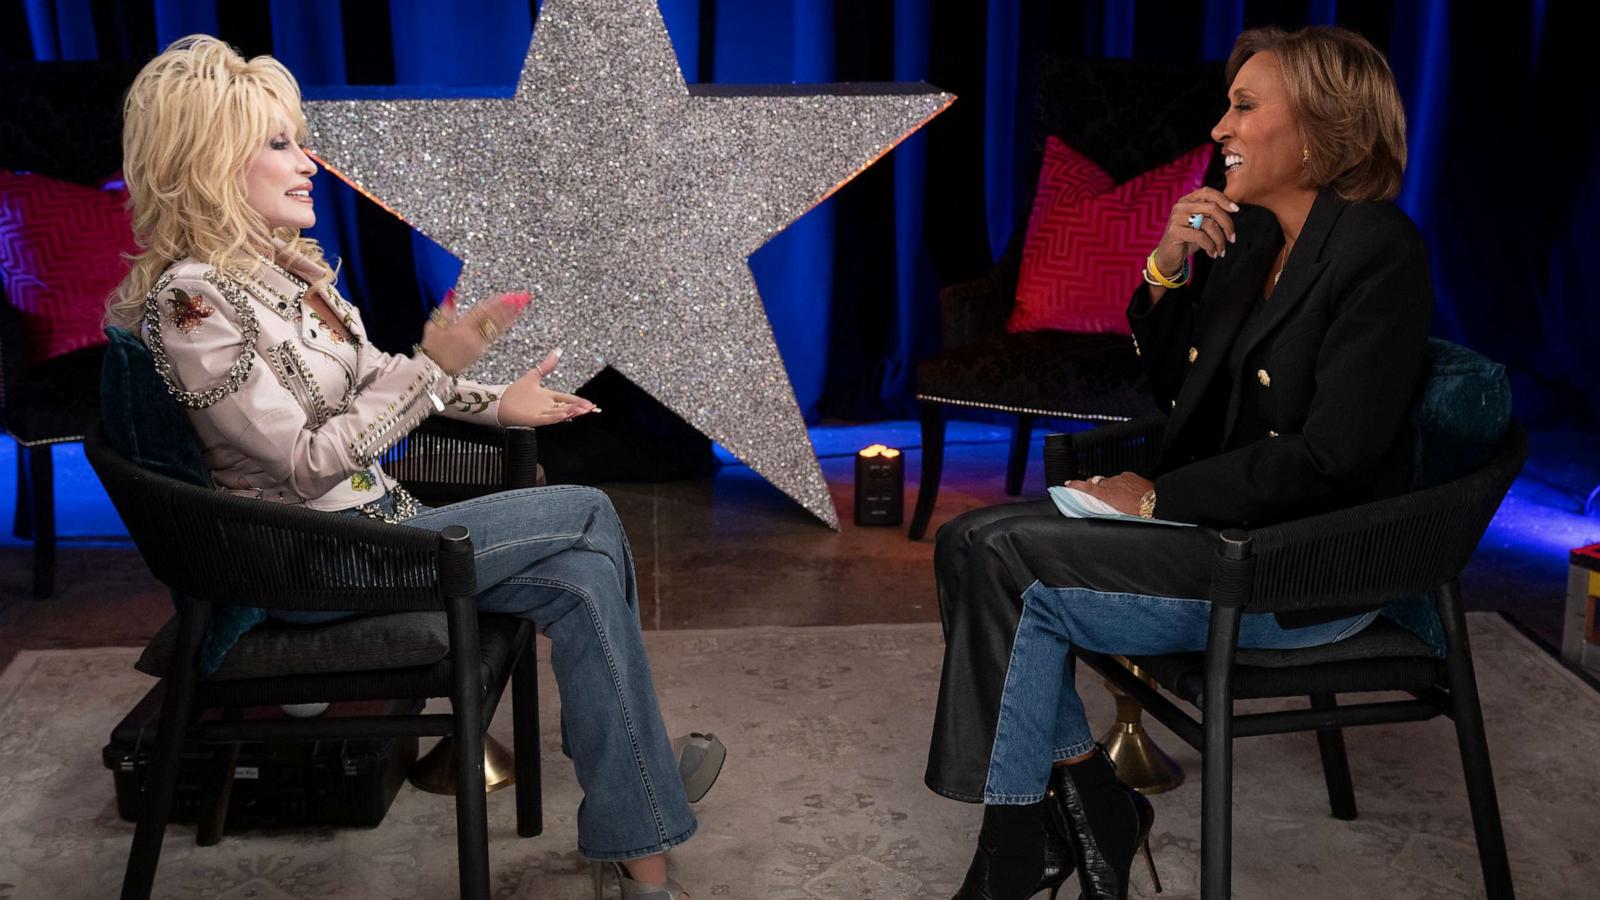 PHOTO: Dolly Parton and Robin Roberts appear in this image from their interview together.